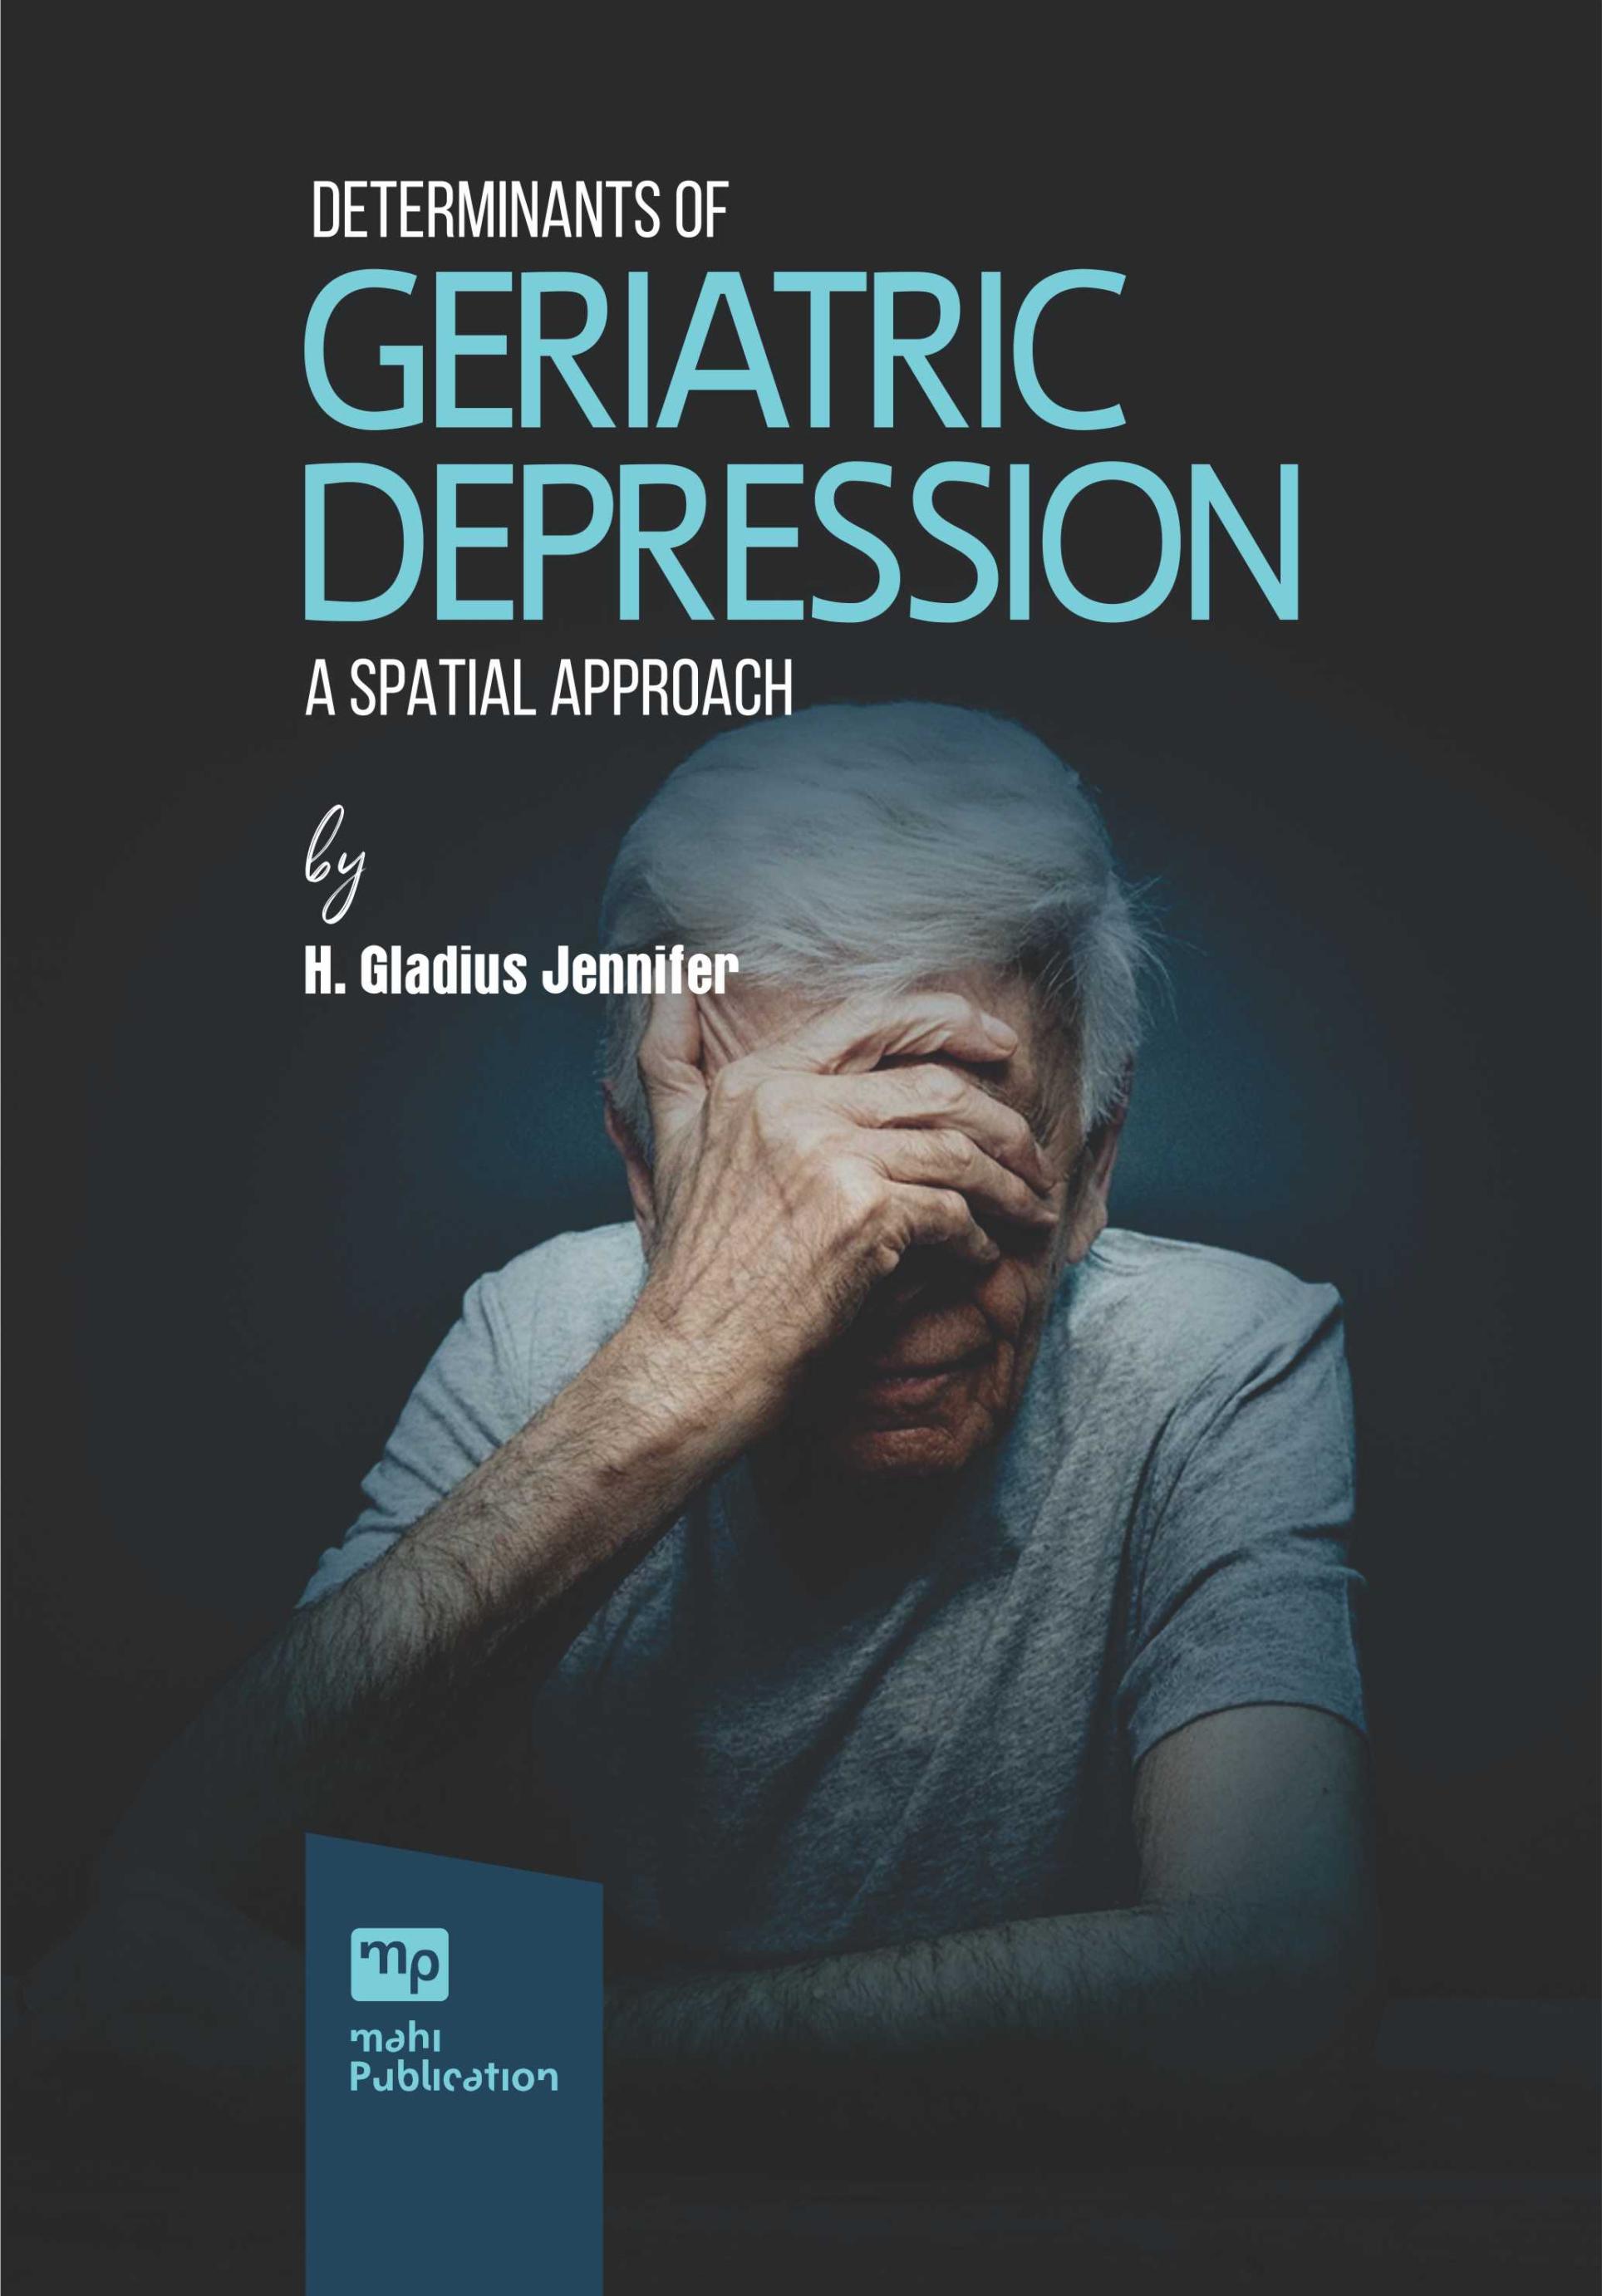 Determinants of Geriatric Depression: A Spatial Approach